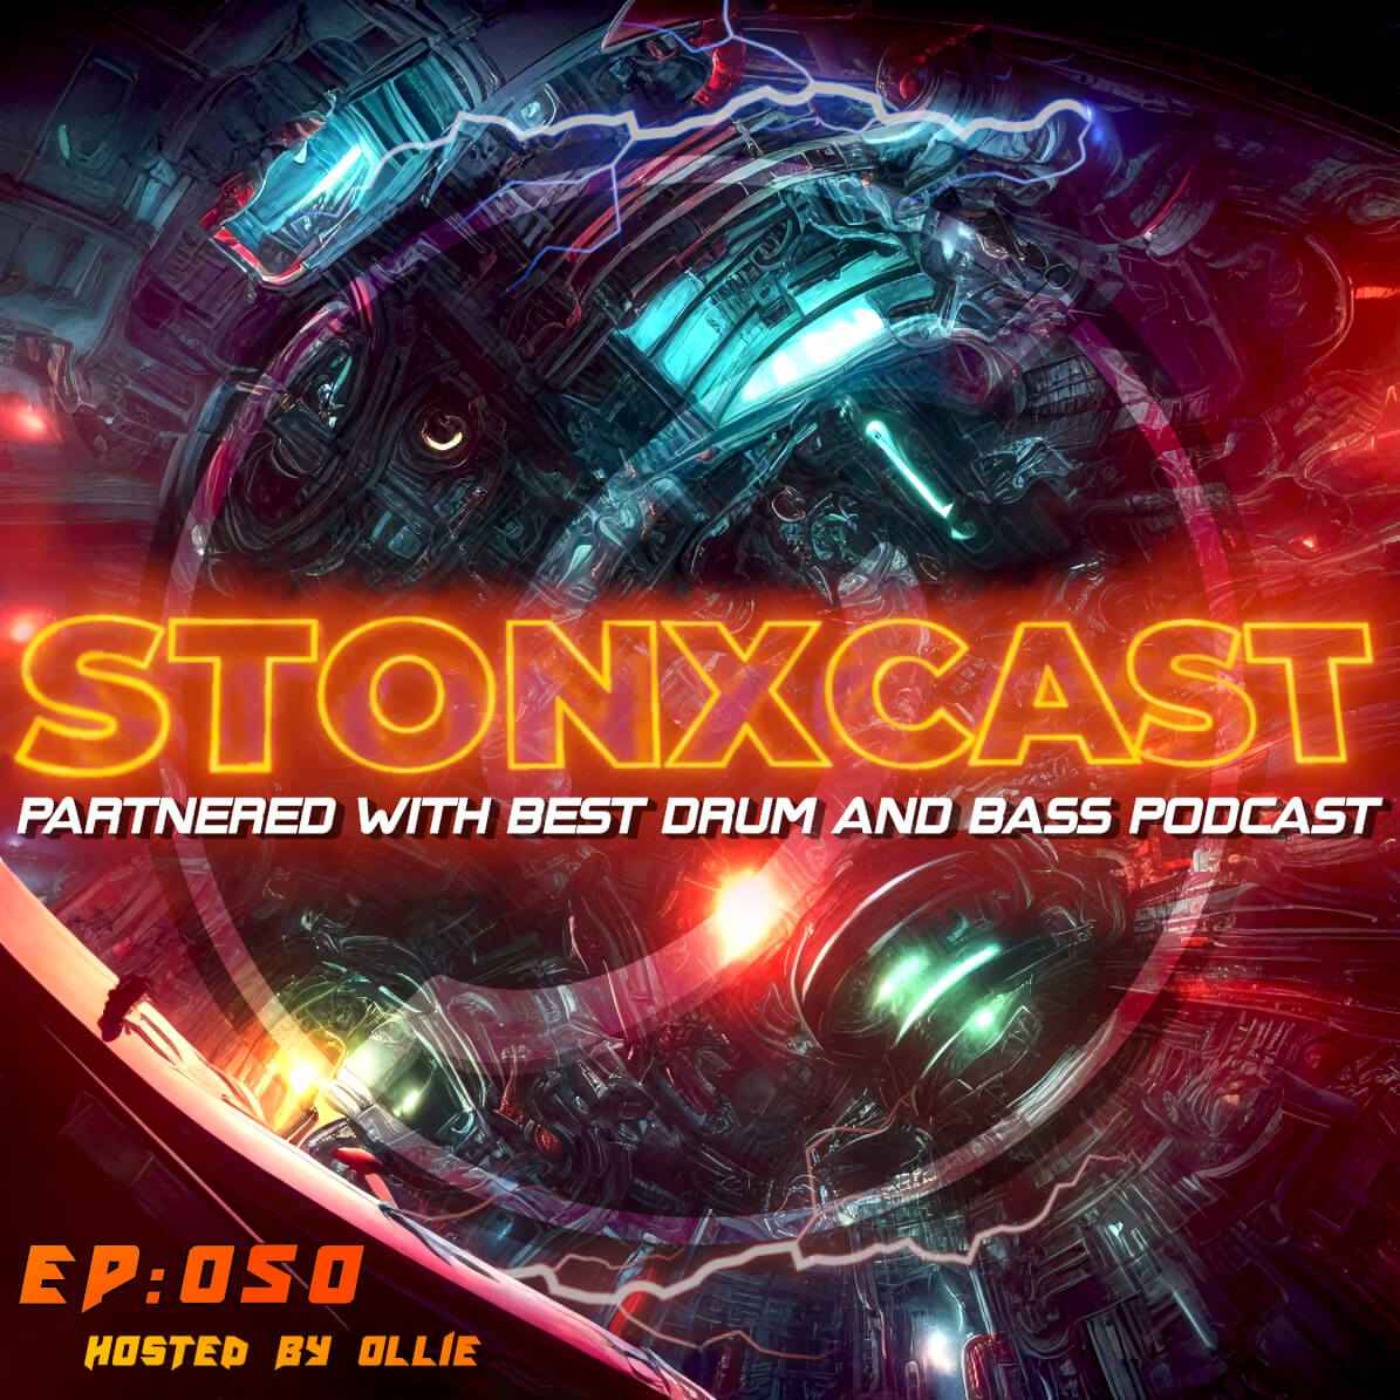 Stonxcast EP:050 - Hosted by Ollie Artwork